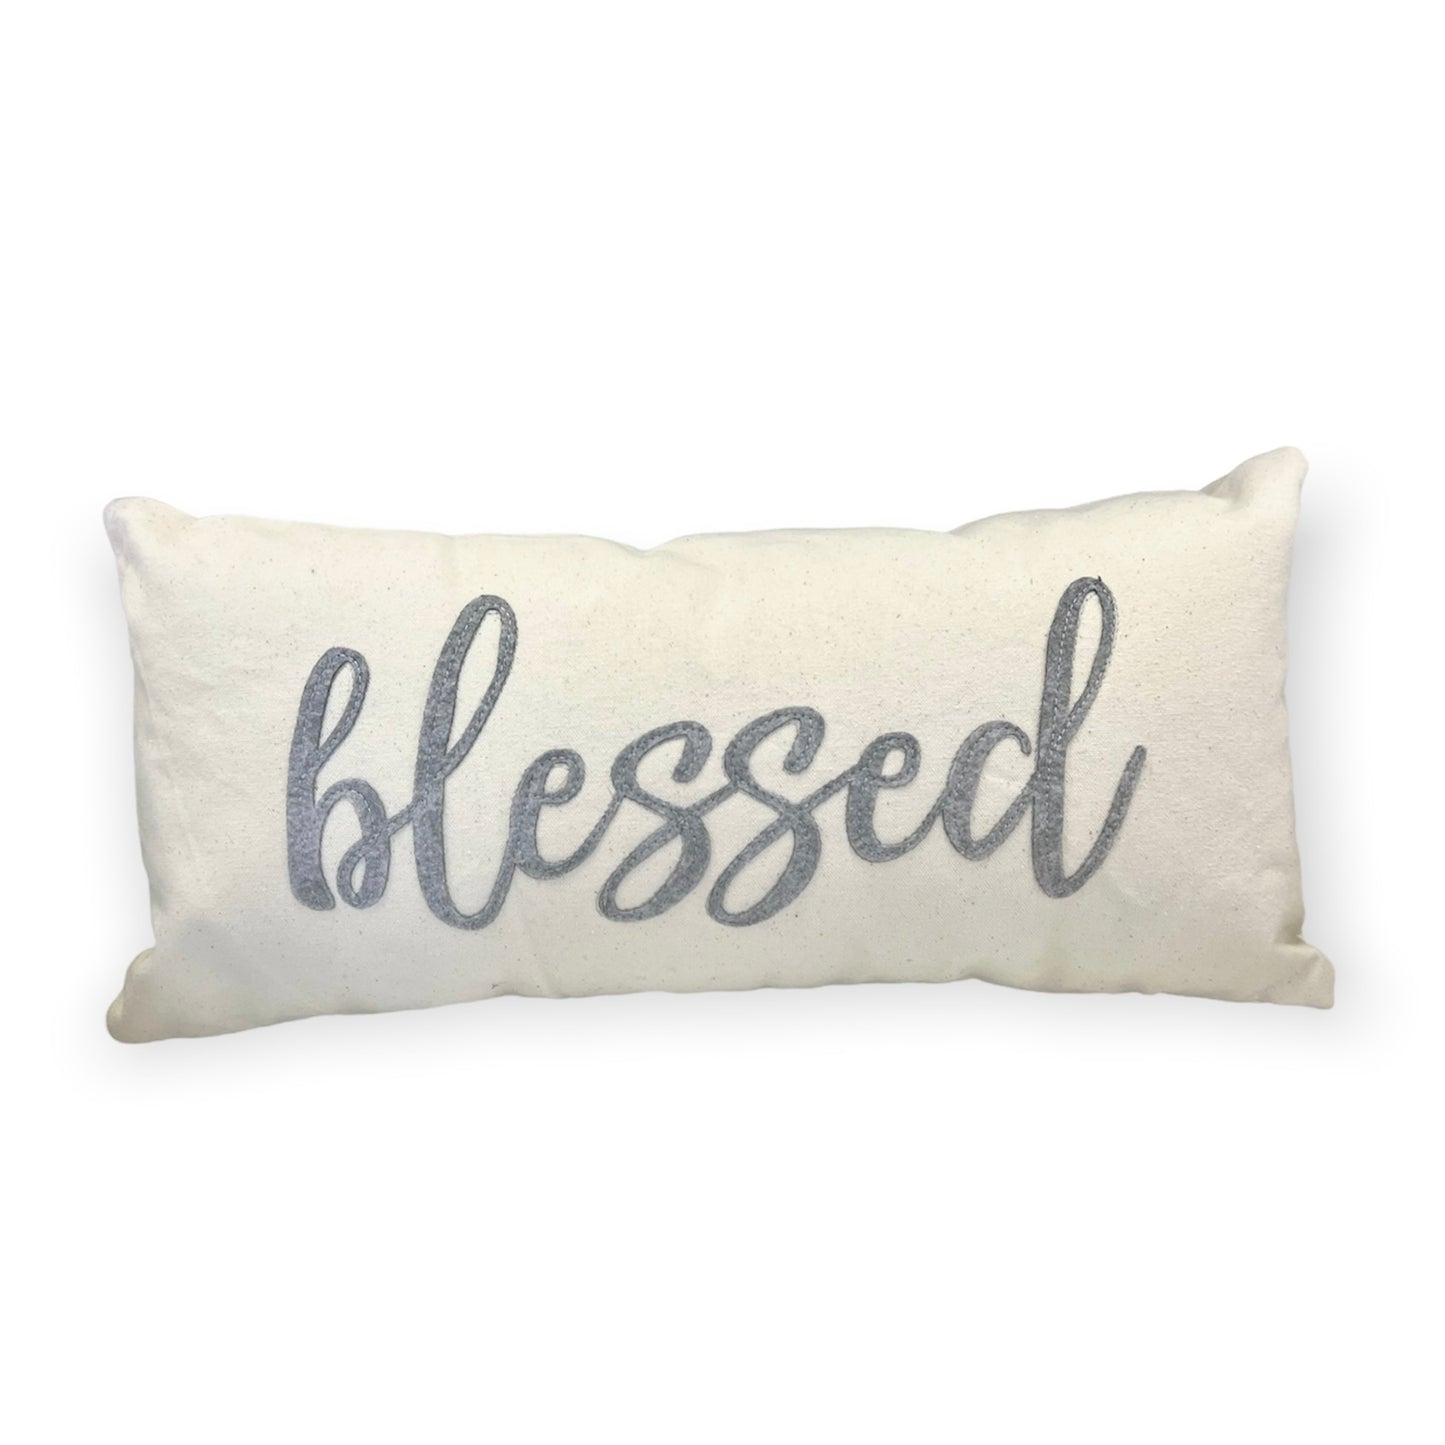 "Blessed" Pillow